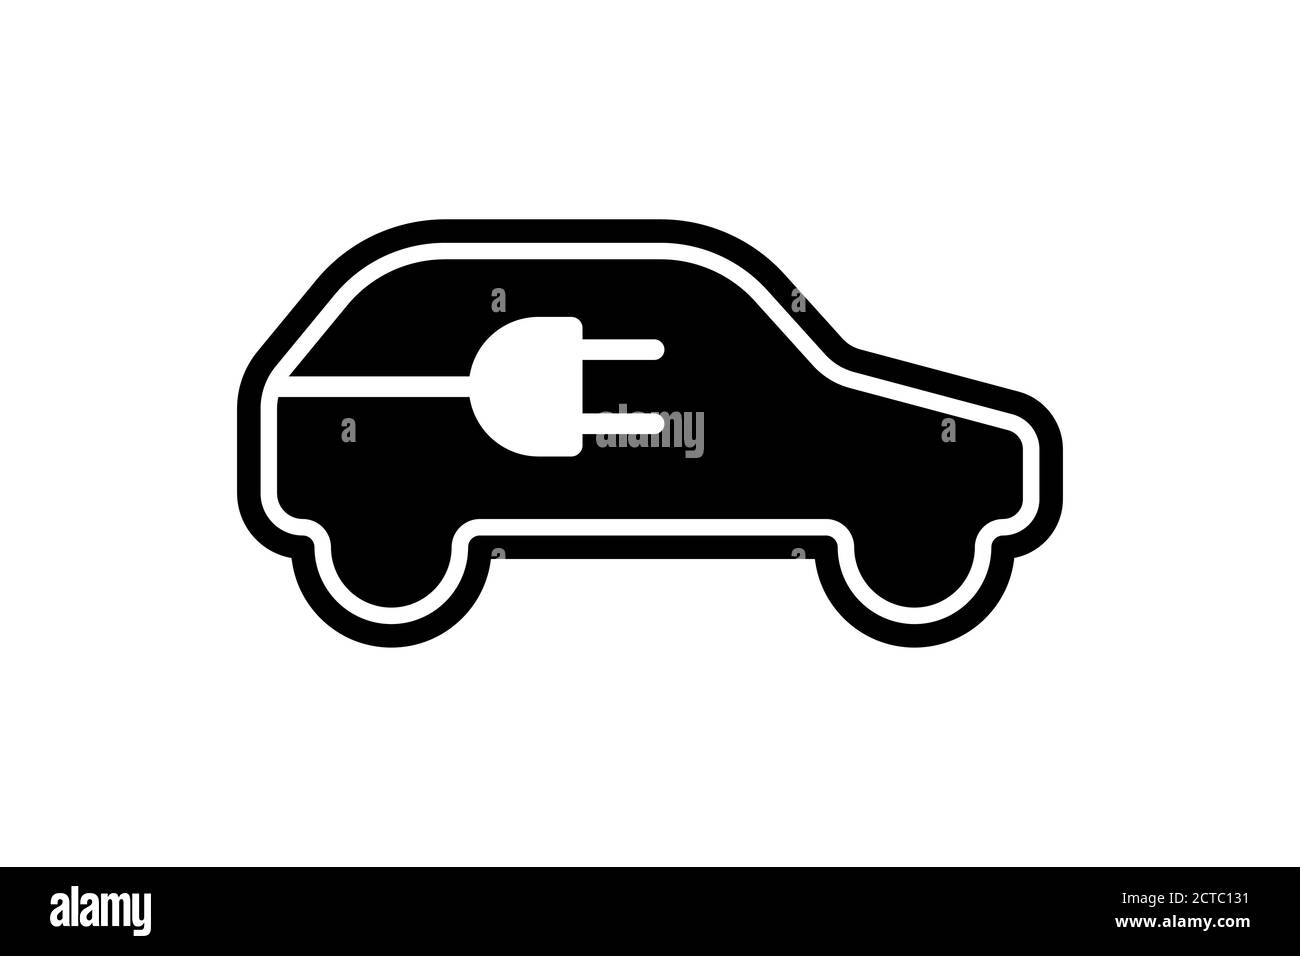 Electric car icon. Electrical cable plug charging station black symbol. Eco friendly electric auto vehicle logo concept. Vector eps electricity illustration Stock Vector